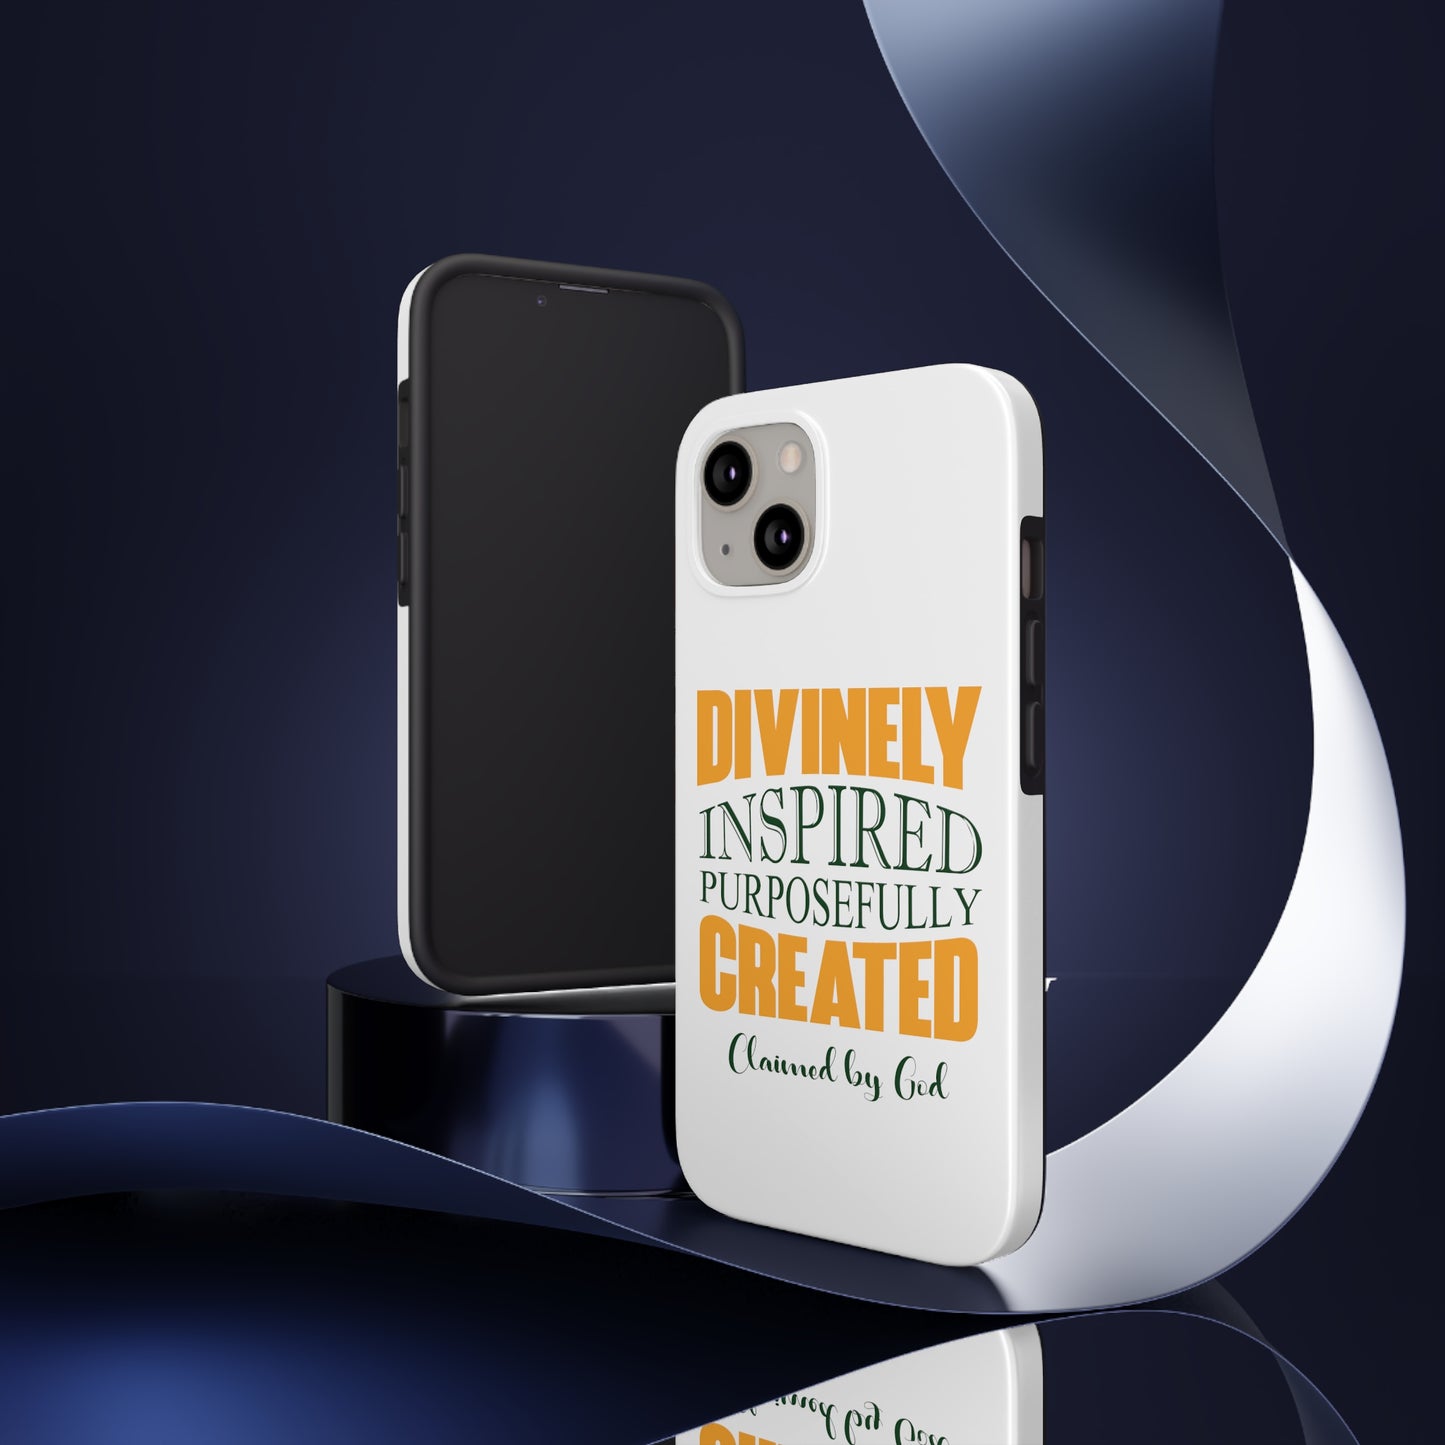 Divinely Inspired Purposefully Created Tough Phone Cases, Case-Mate